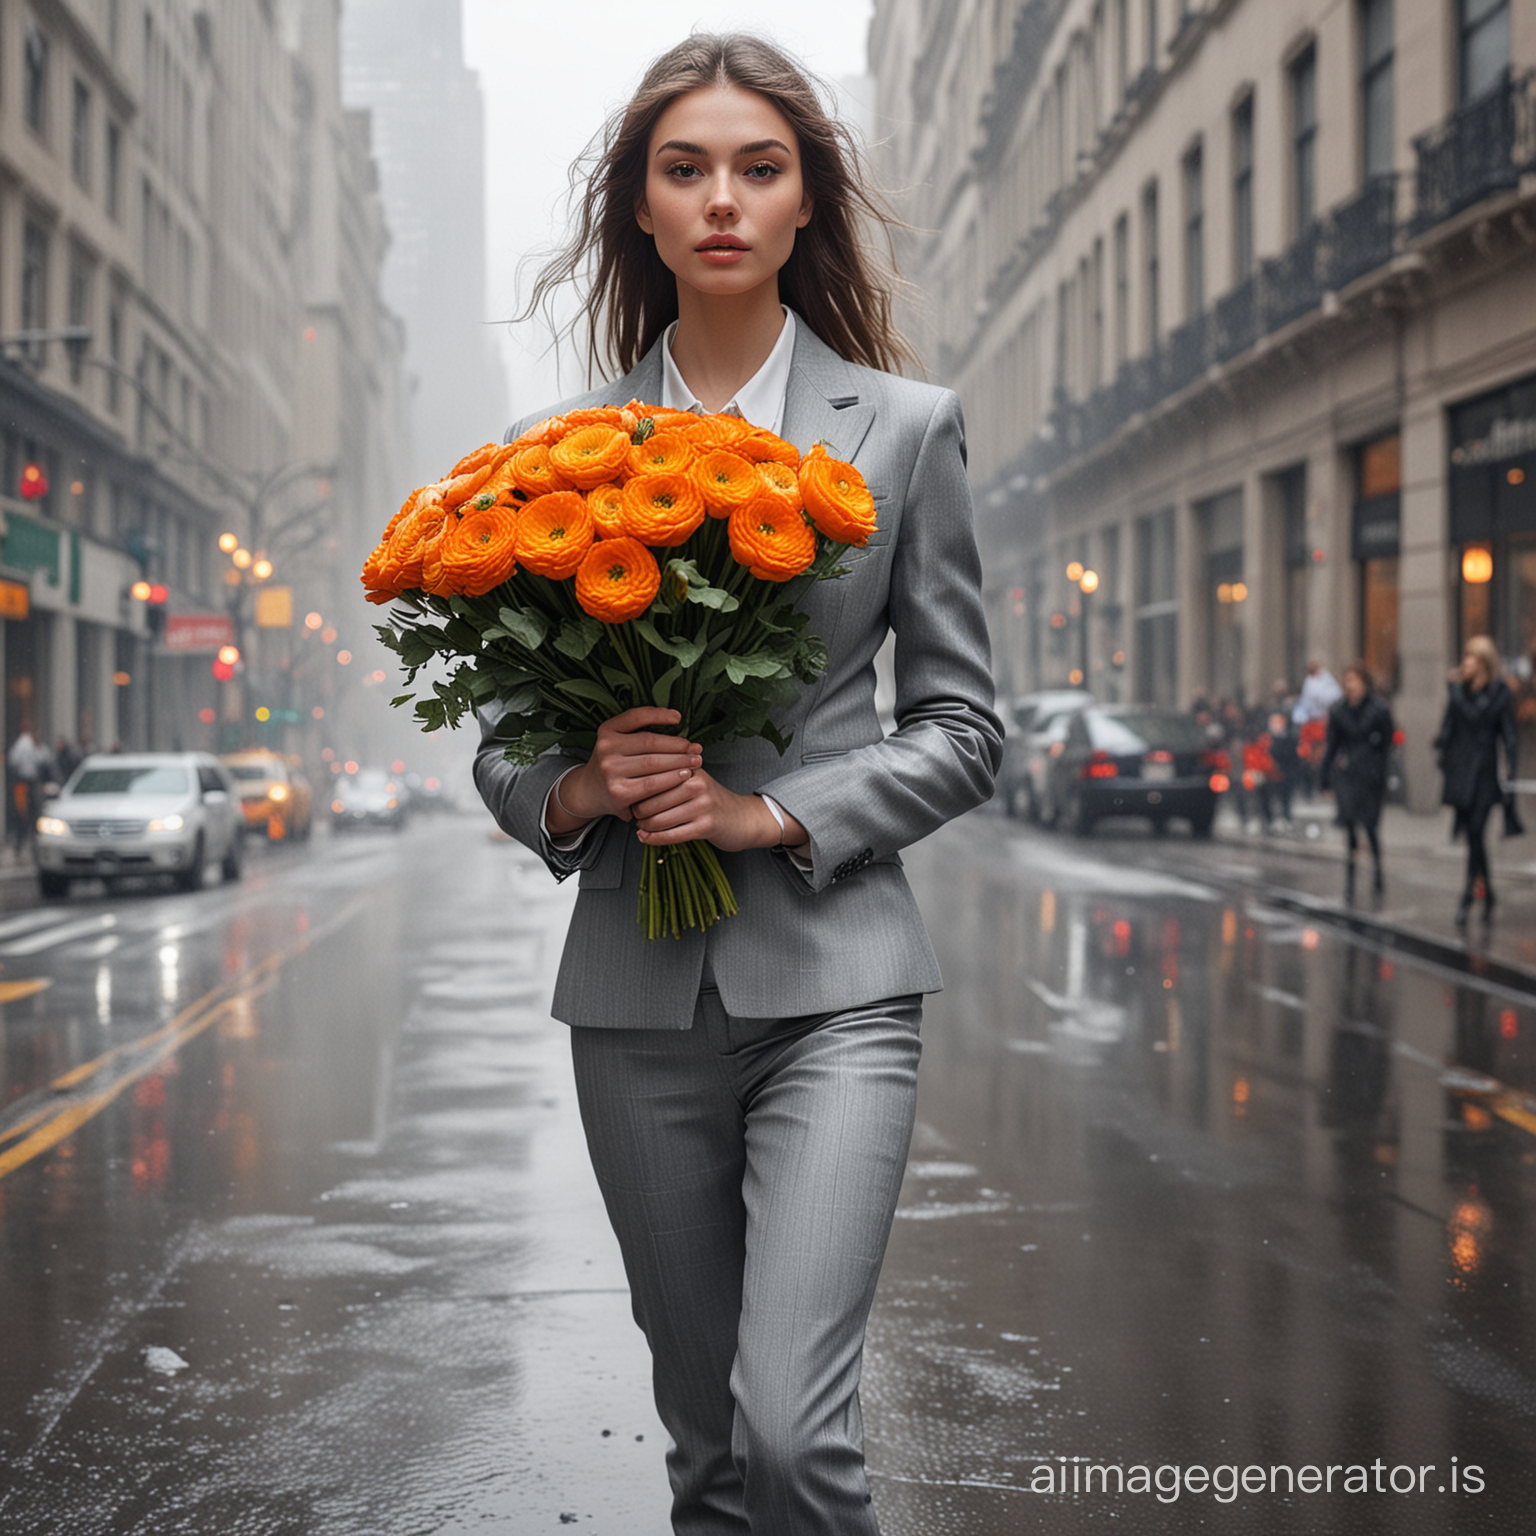 On the gray foggy street after the rain, 5th Avenue goes a girl in a gray strict suit, on pointes and holds in her hands a huge shaggy bouquet of orange ranunculus, cake proudly, beautiful model, perfect body proportions and anatomically accurate, luxury, bohemia, New York, bright large bouquet, Overcast, soft light,unreal engine, professional foto by David Bailey, photo, illustration, 3d render, poster, fashion, architecture, portrait photography